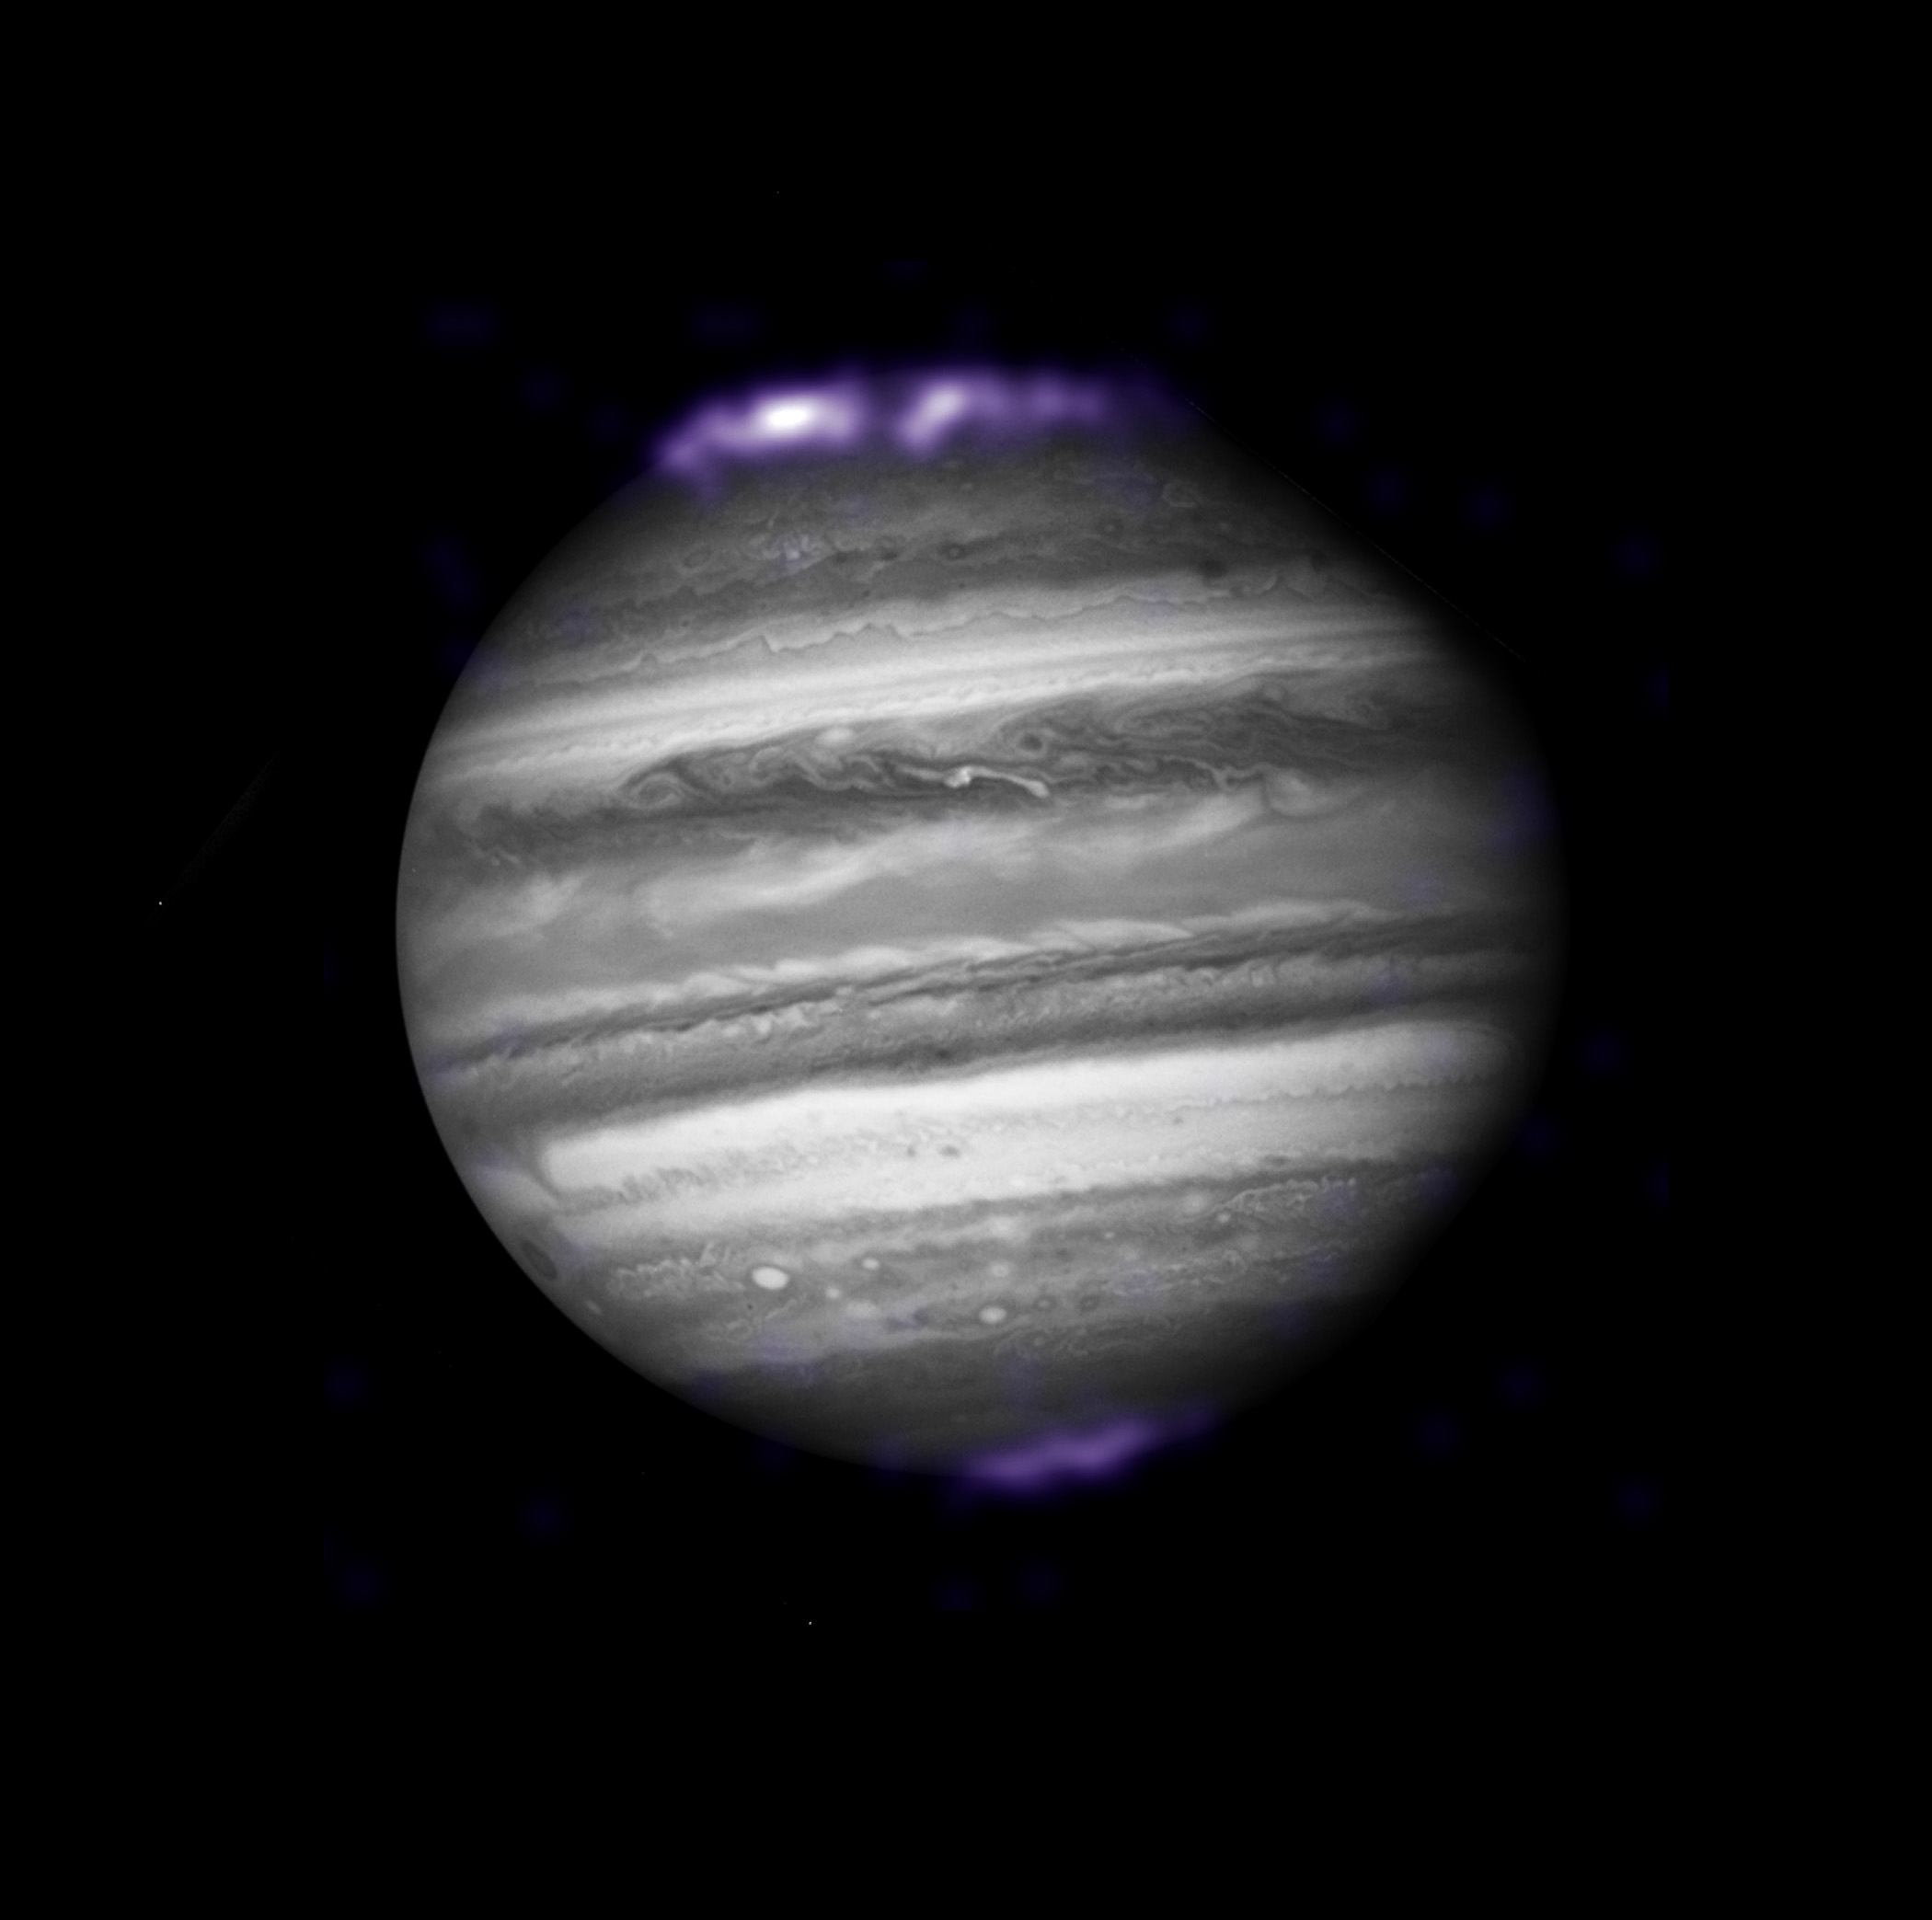 X-ray auroras on Jupiter, seen by the Chandra X-Ray Observatory, are overlaid here on an optical image from the Hubble Space Telescope taken at the same time.